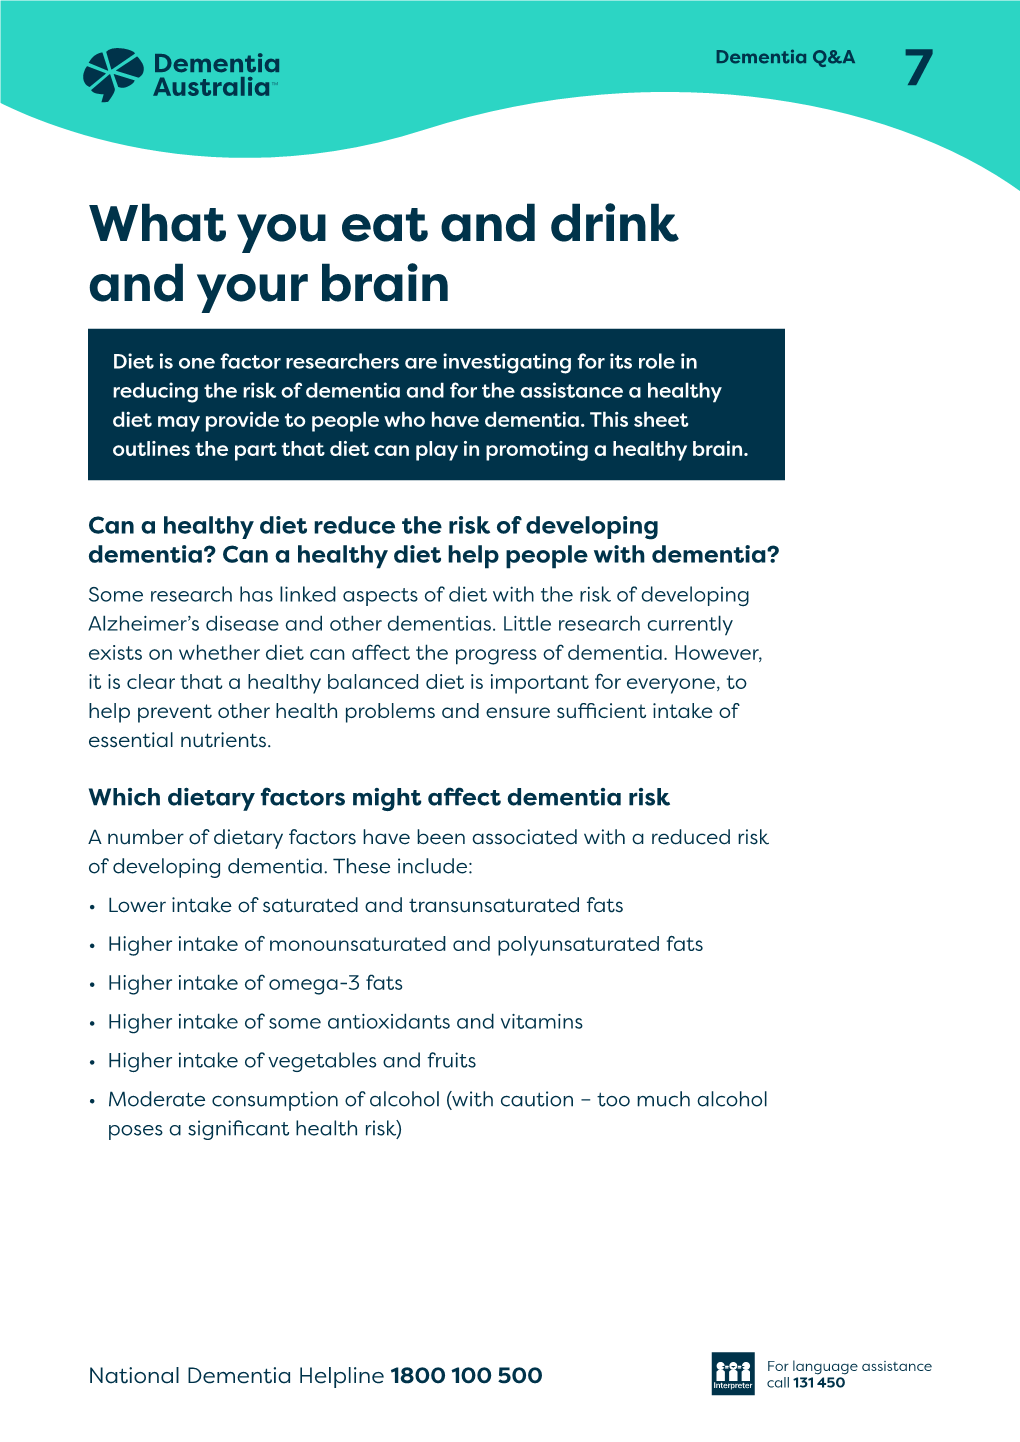 What You Eat and Drink and Your Brain